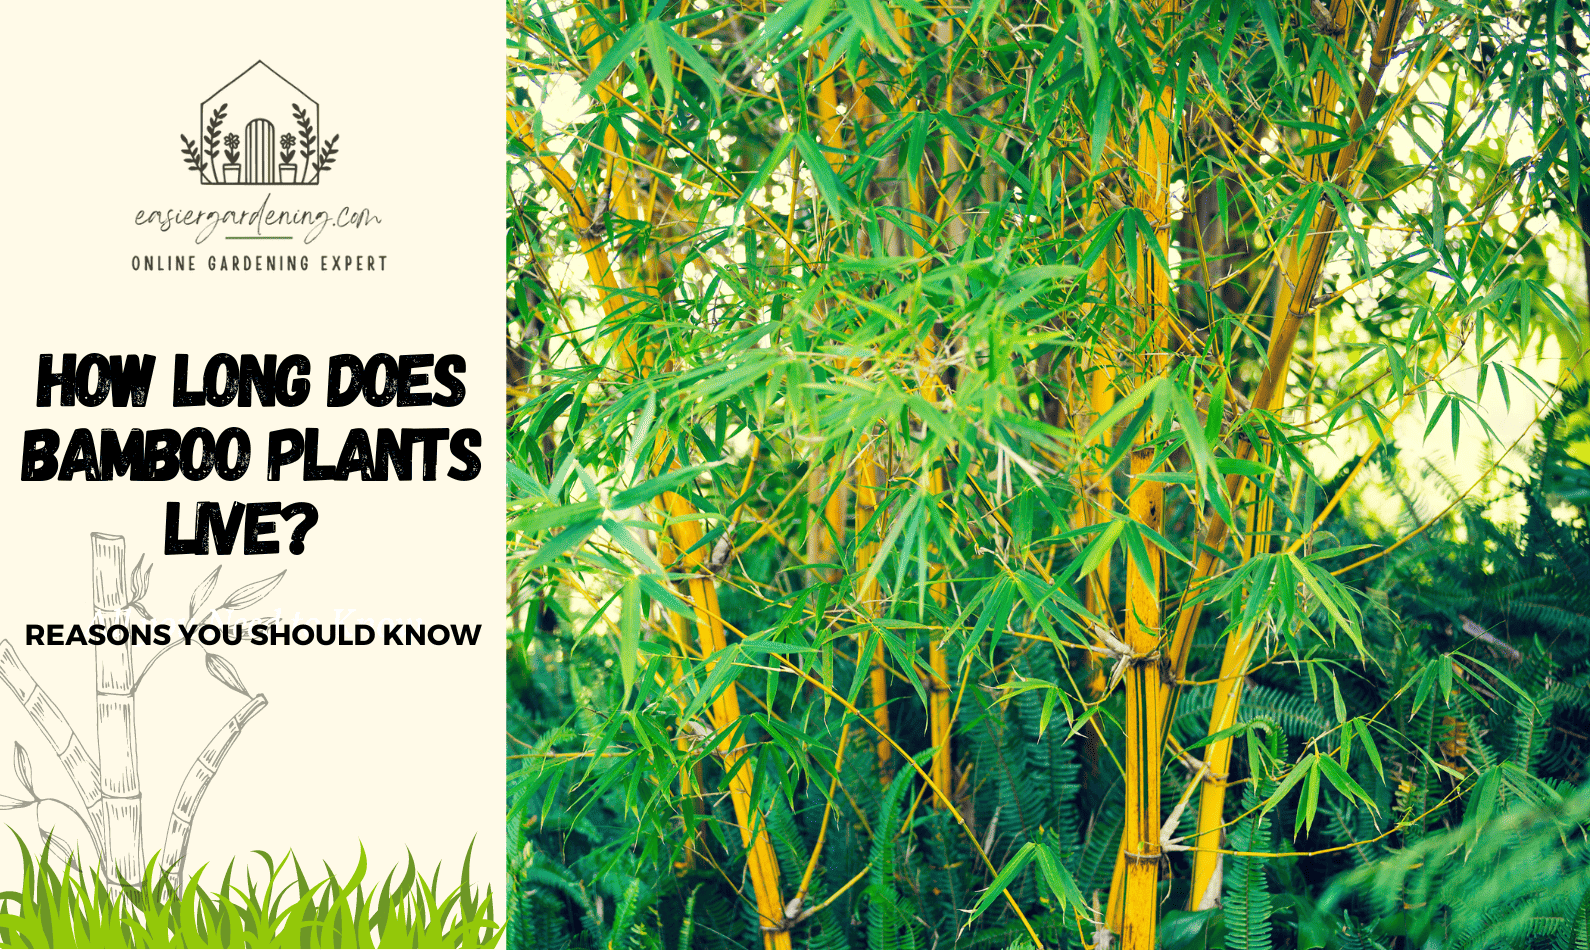 How Long Does Bamboo Plants Live?